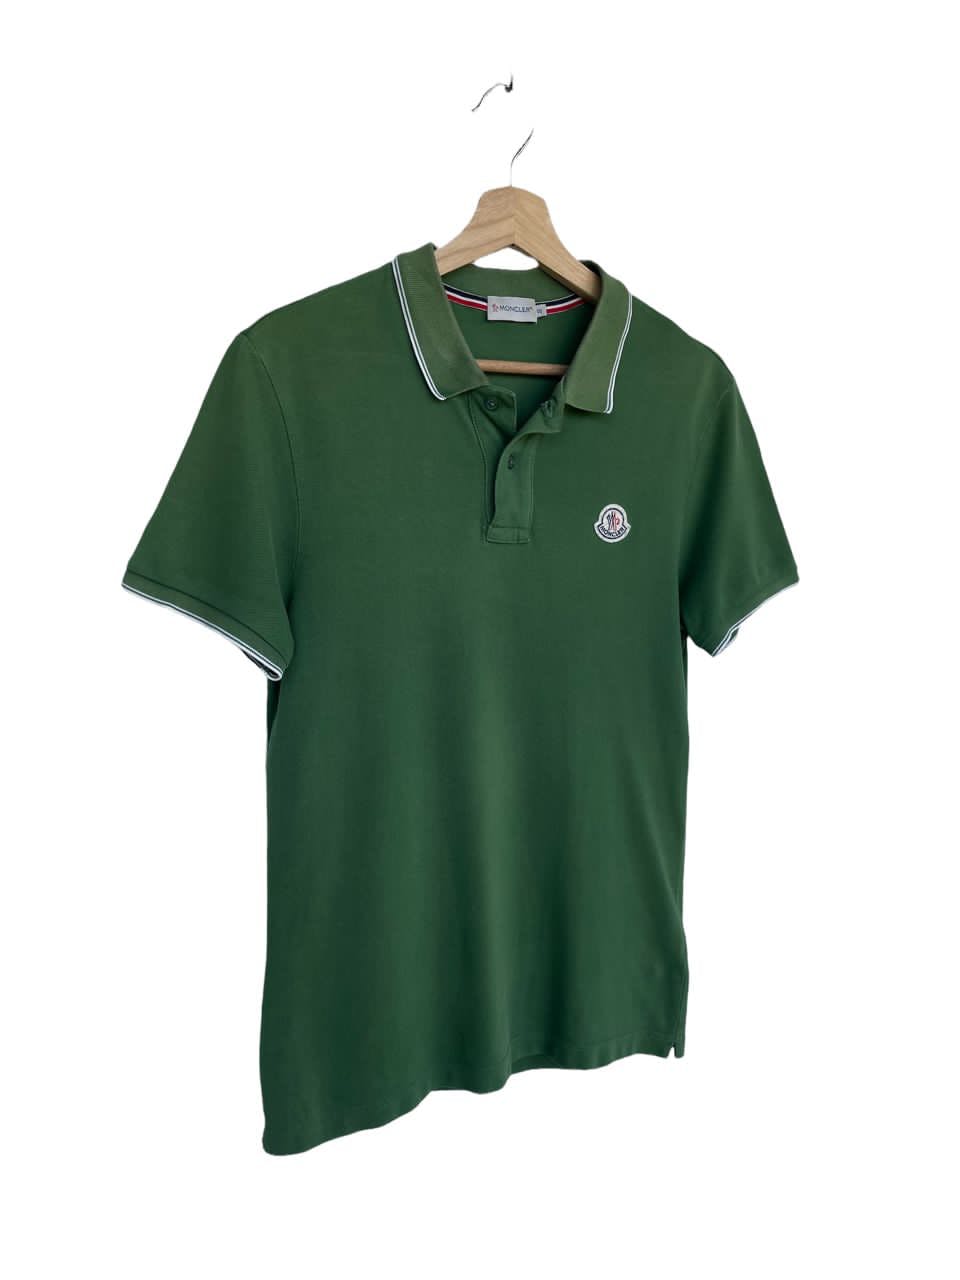 Authentic!! Moncler Ringer Button up Polo Shirt - 2